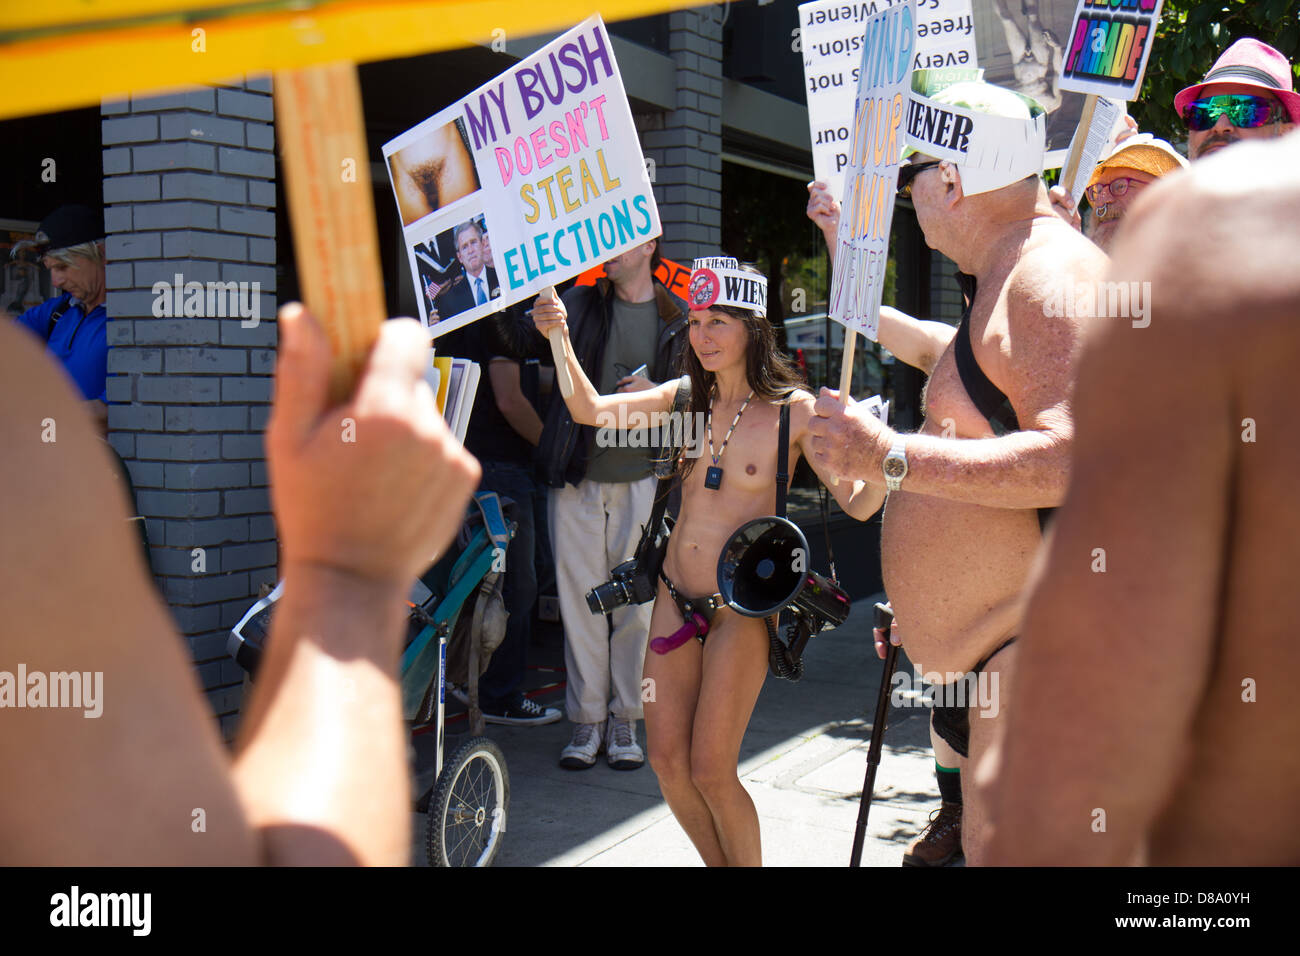 Gypsy Taub (center) and nudity activists demonstrate against the recent cit...